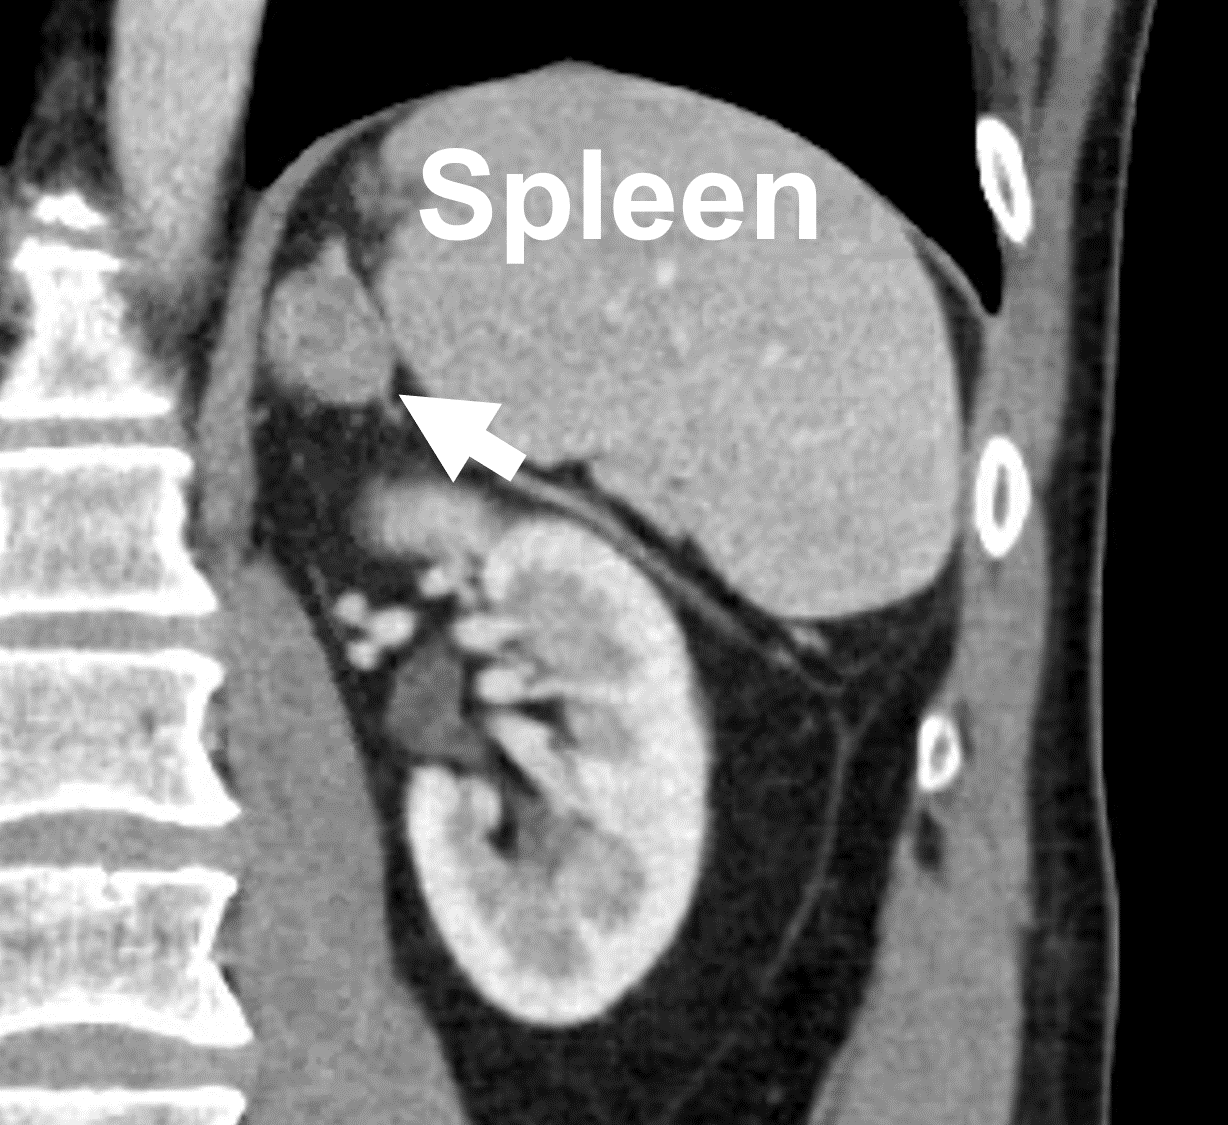 CT scan demonstrating a left adrenal metastasis from colorectal cancer (arrow). Dr. Carling performed a successful partial, cortex-sparing operation via the Mini Back Scope Adrenalectomy (MBSA) since the patients had a previous right adrenalectomy.